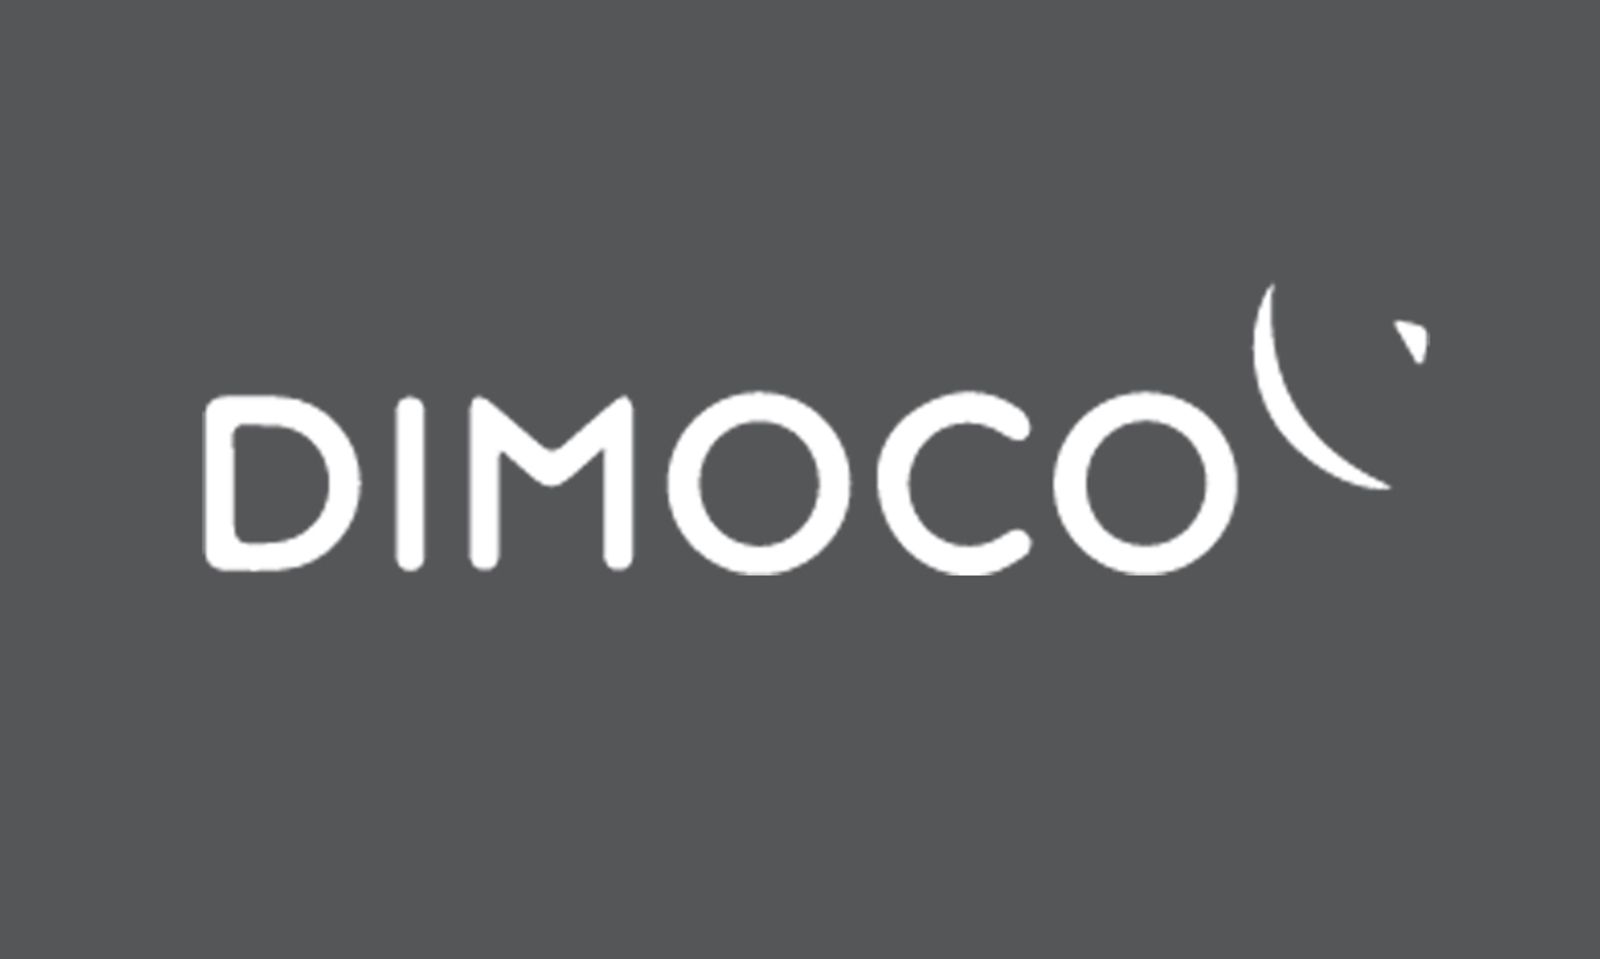 Dimoco Sponsoring European Summit, Hosting Happy Hour, Discussing Carrier Billing